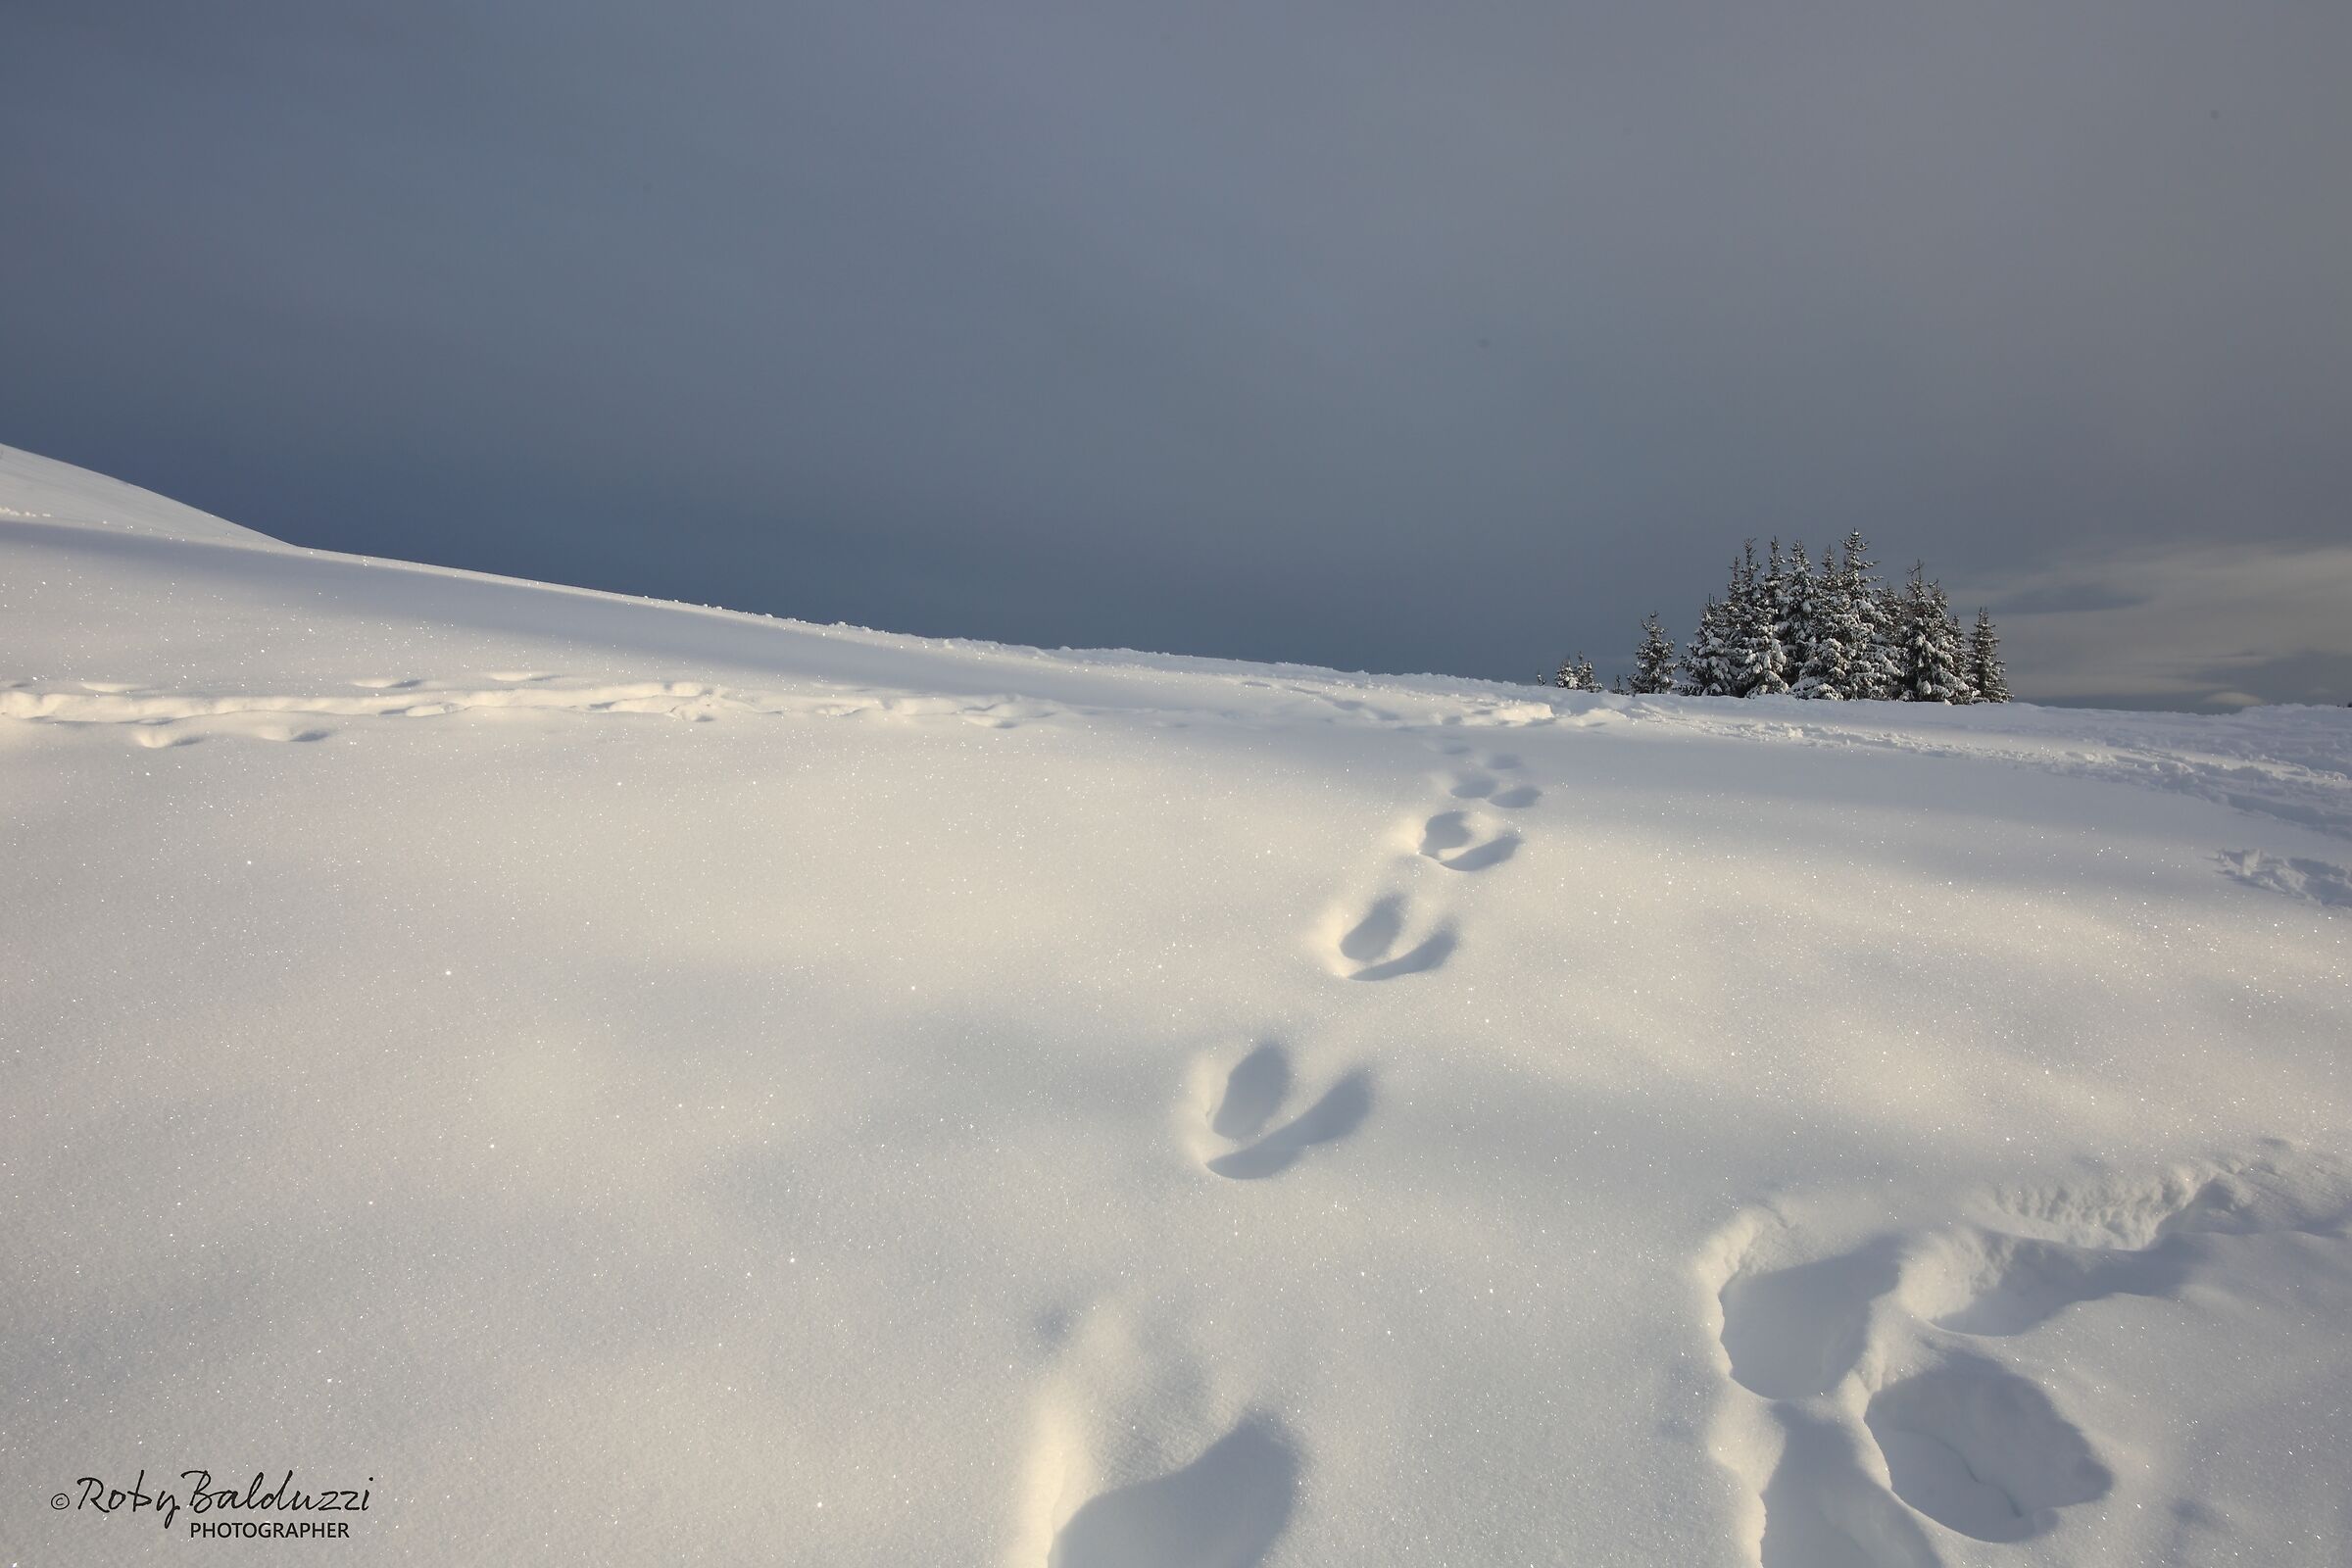 Footsteps in the Snow...